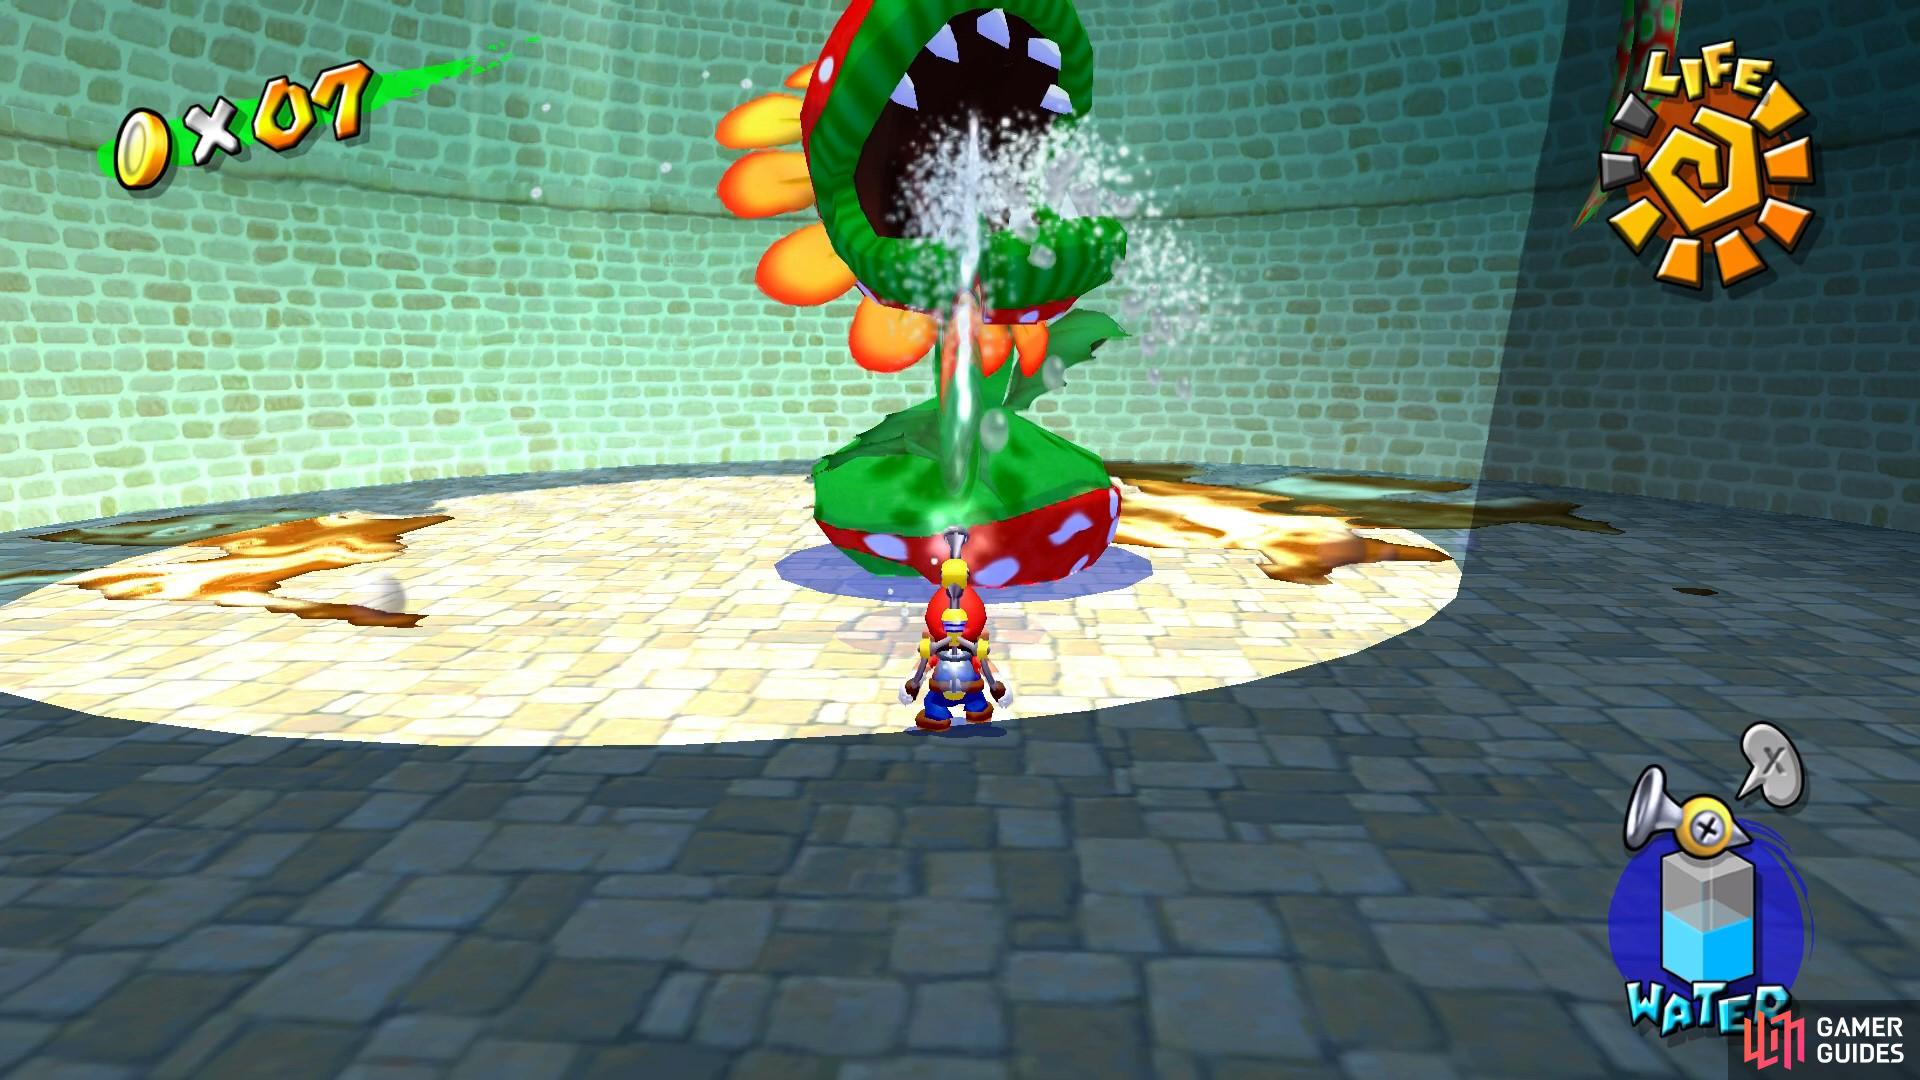 Shoot water into Petey Piranha's mouth to fill his belly up